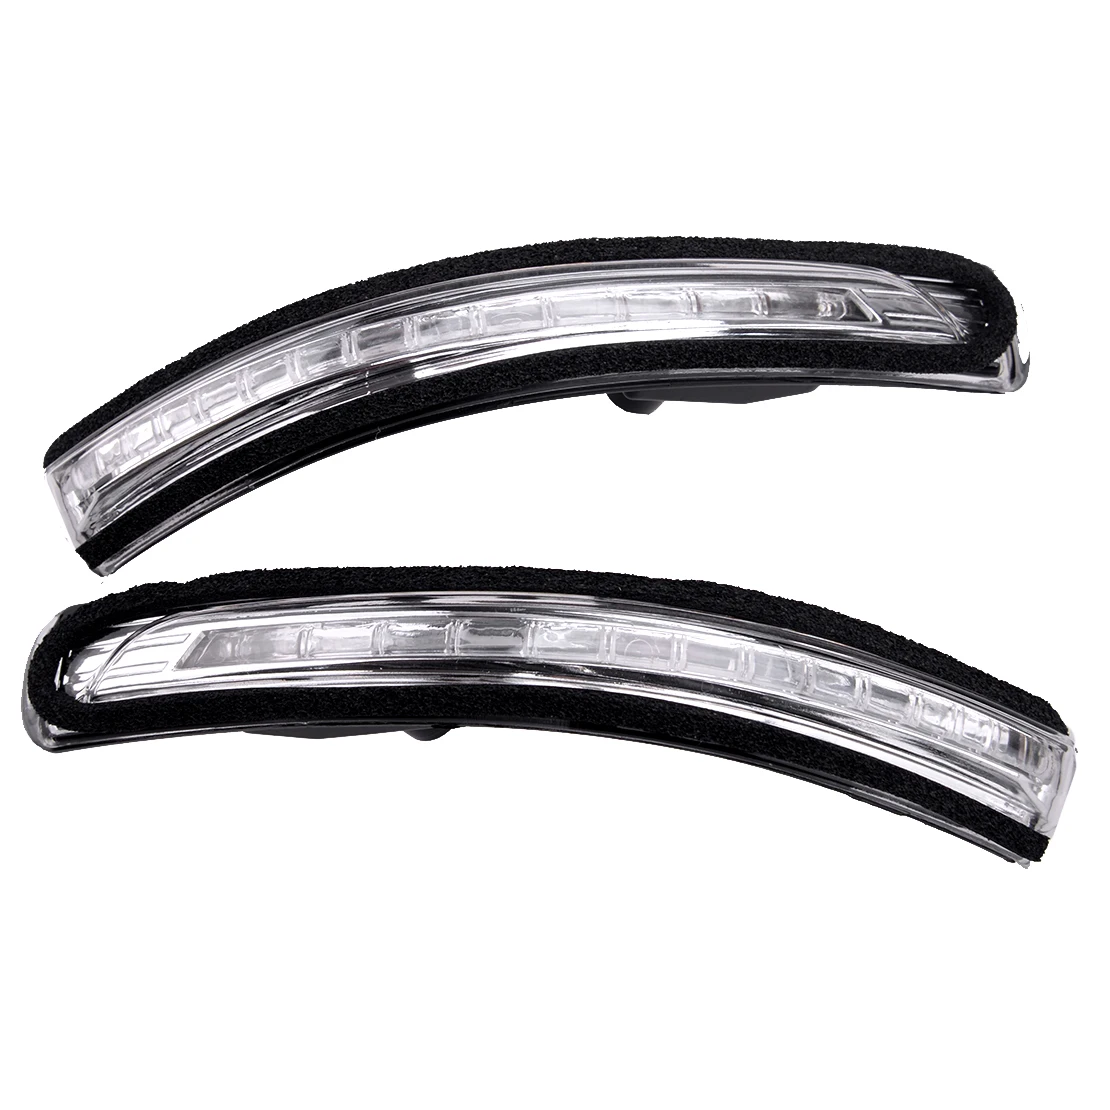 

1 Pair 876141W000 876241W000 Wing Side Mirror Turn Signal Light Indicator Fit for KIA RIO MK3 2011 2012 2013 2014 2015 2016 2017